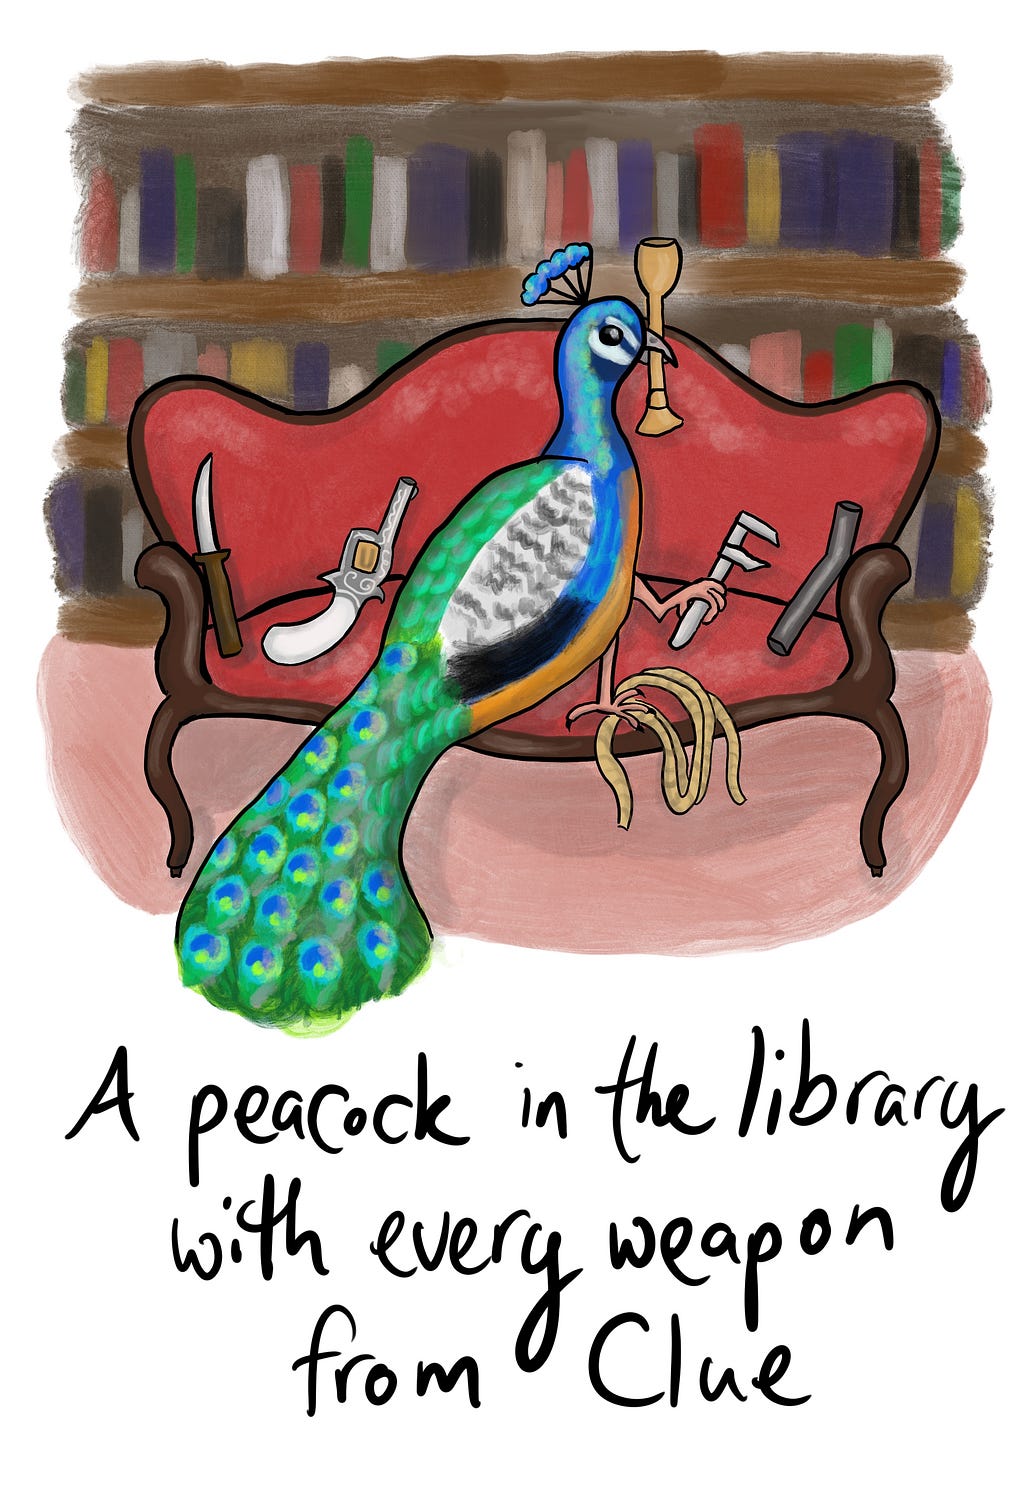 A peacock in the library with every weapon from Clue